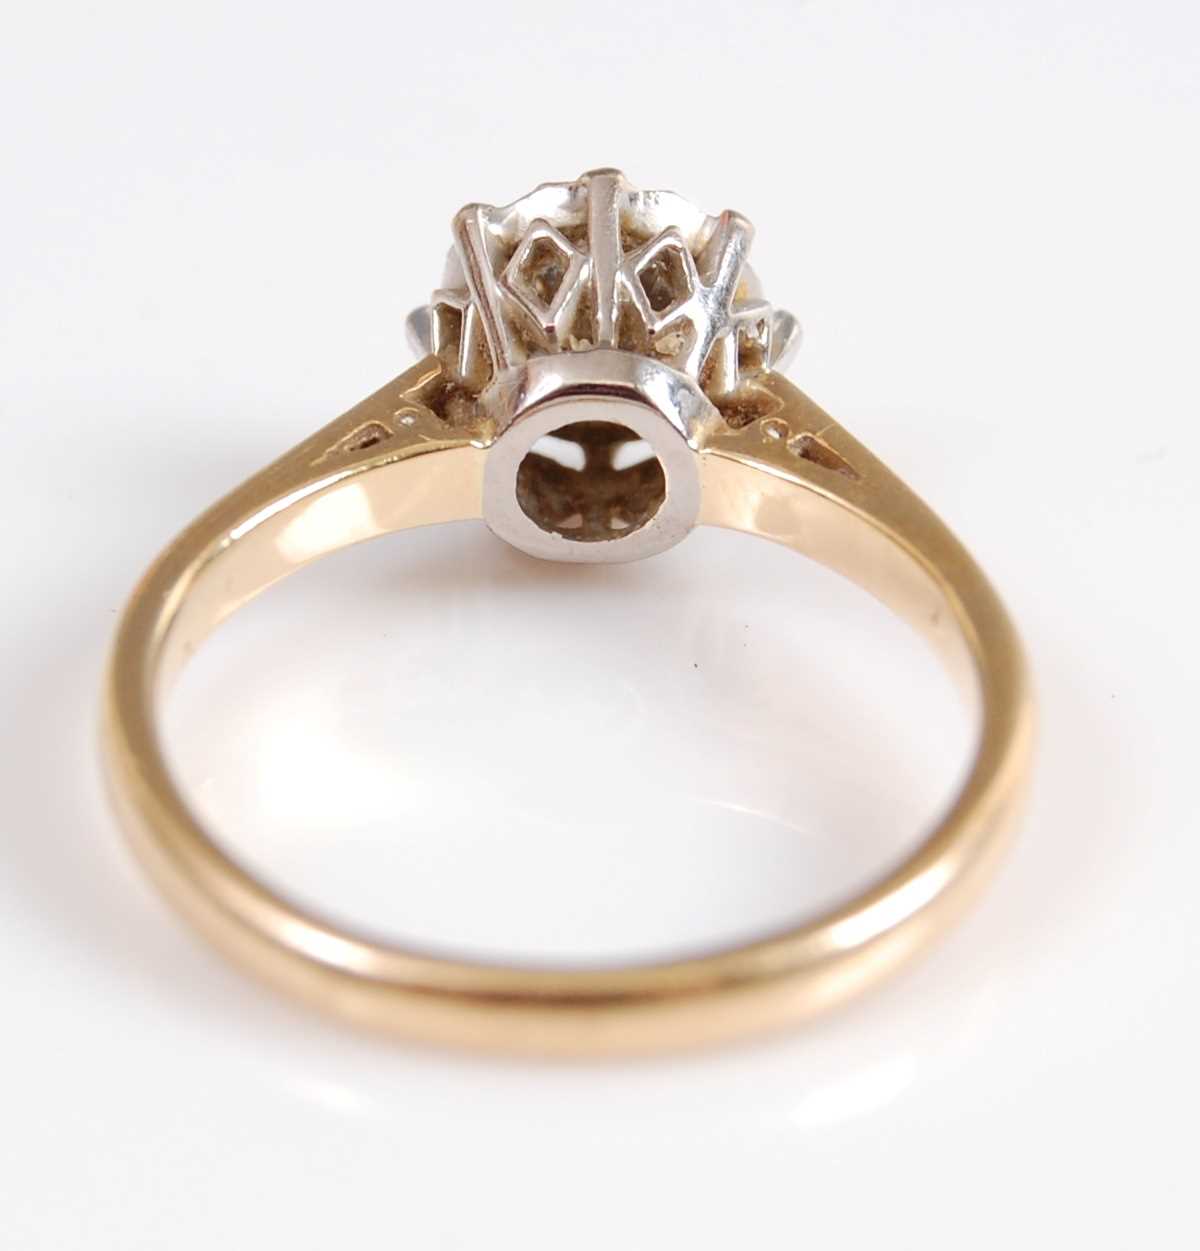 A yellow and white metal diamond single stone ring, featuring an Old European cut diamond in an - Image 3 of 5